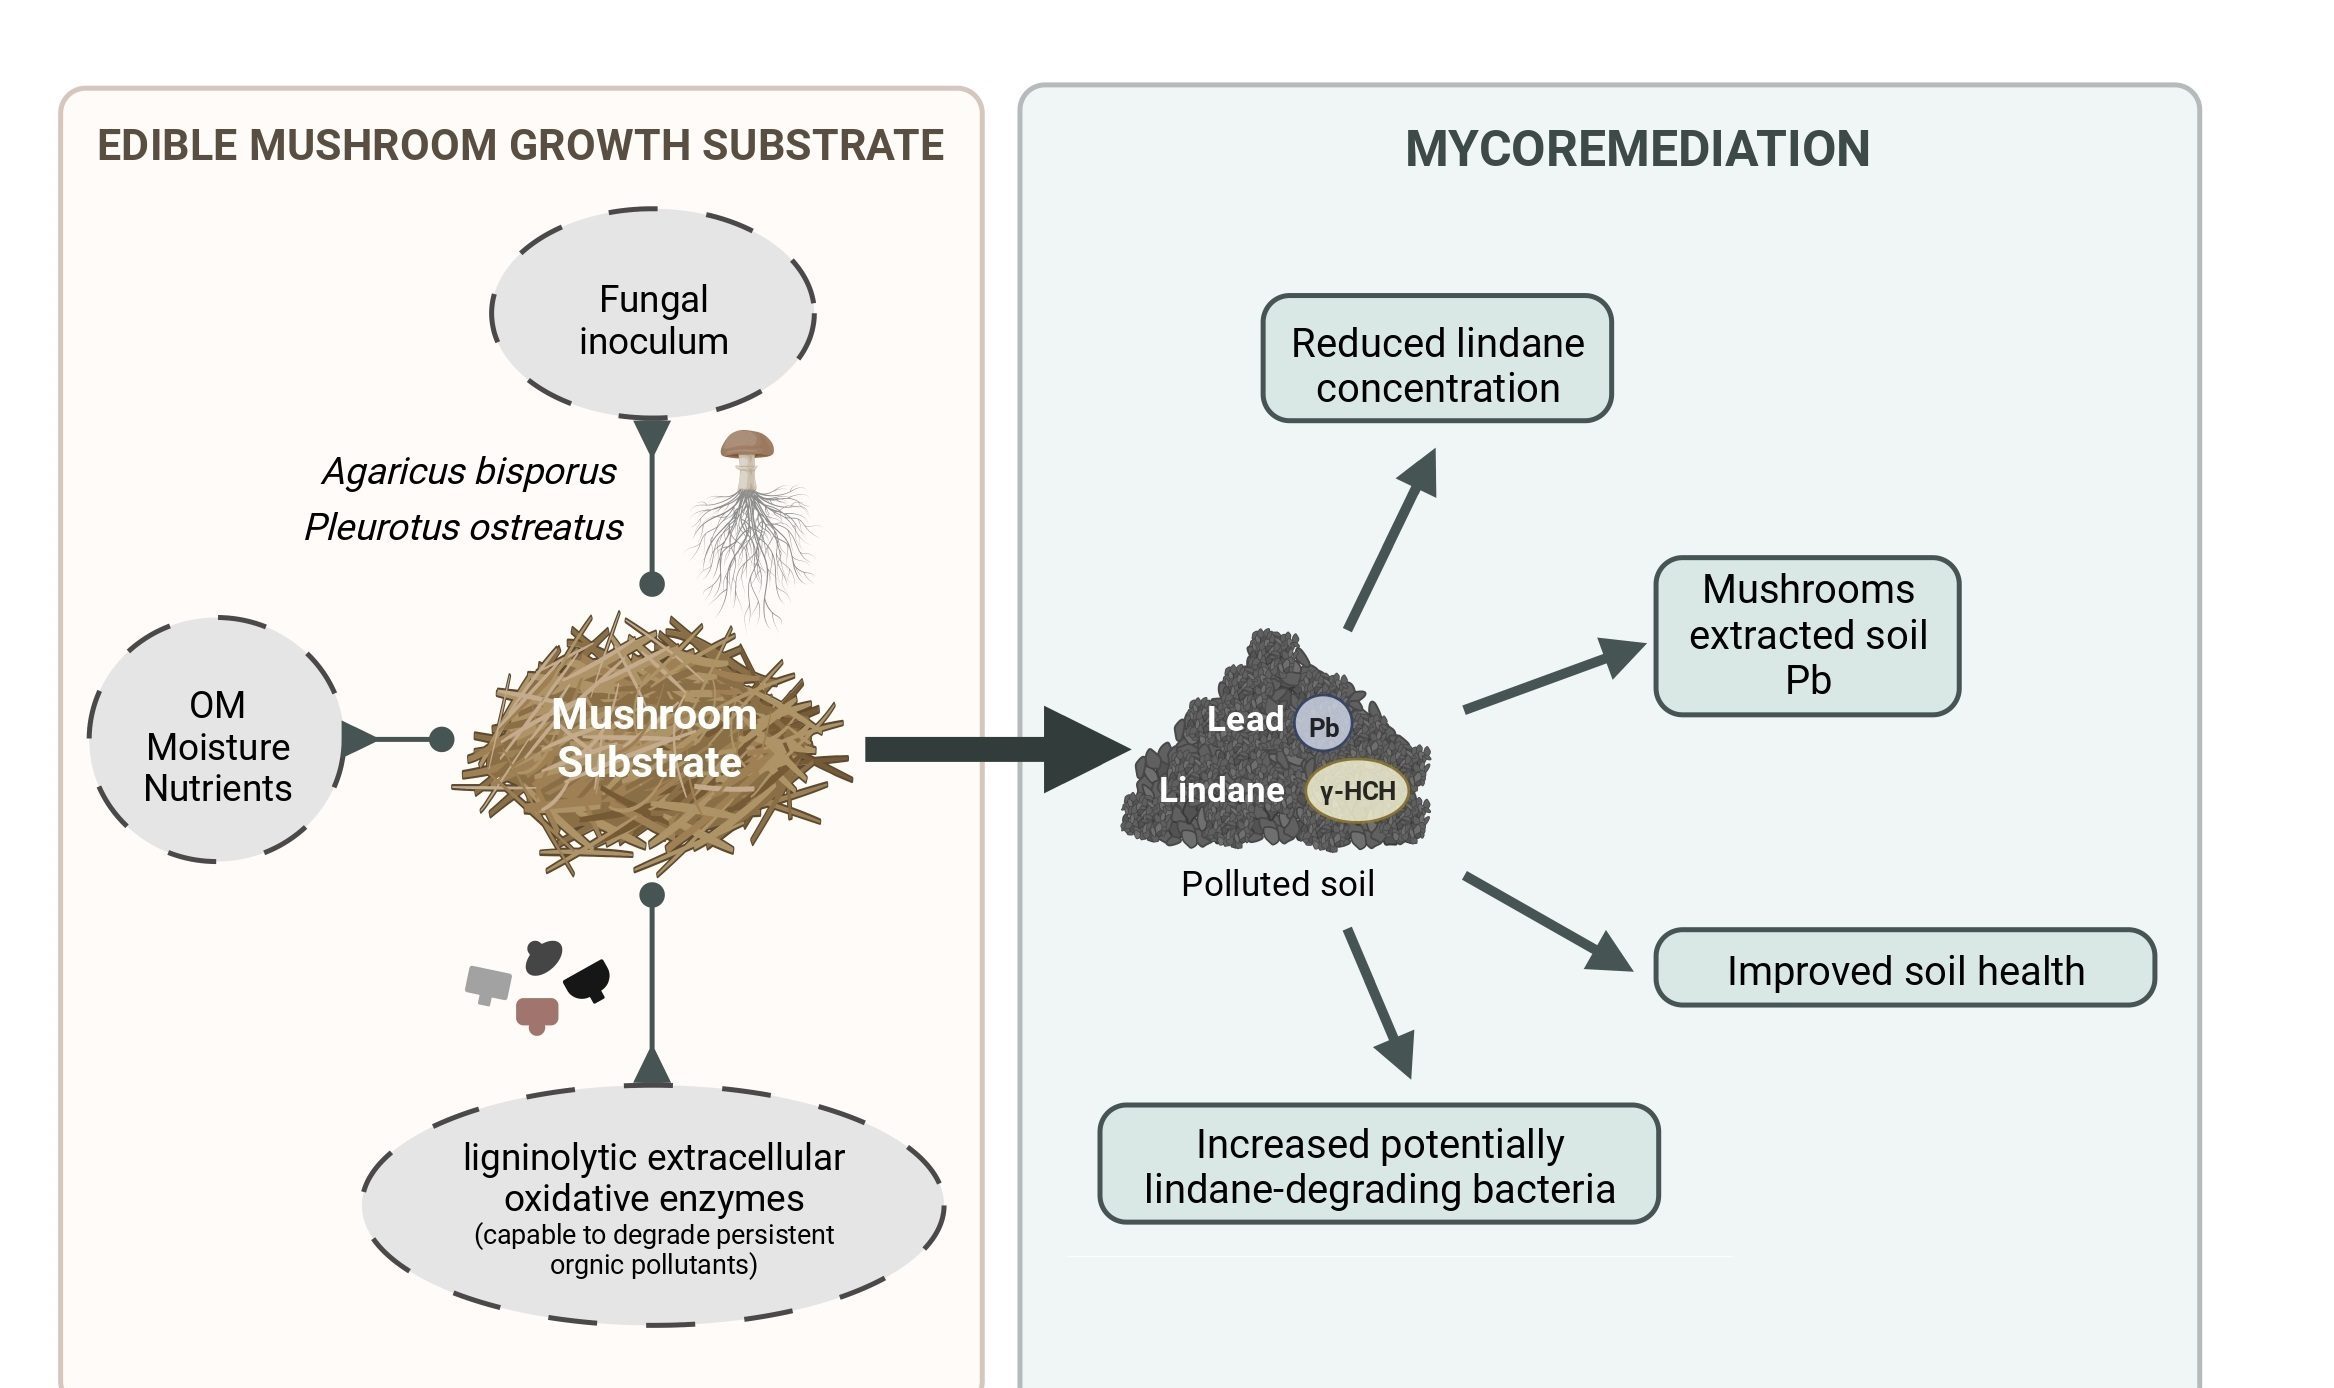 Mycoremediation with Agaricus bisporus  and Pleurotus ostreatus growth substrates versus phytoremediation with Festuca rubra and Brassica sp. for the recovery of a Pb and γ-HCH contaminated soil